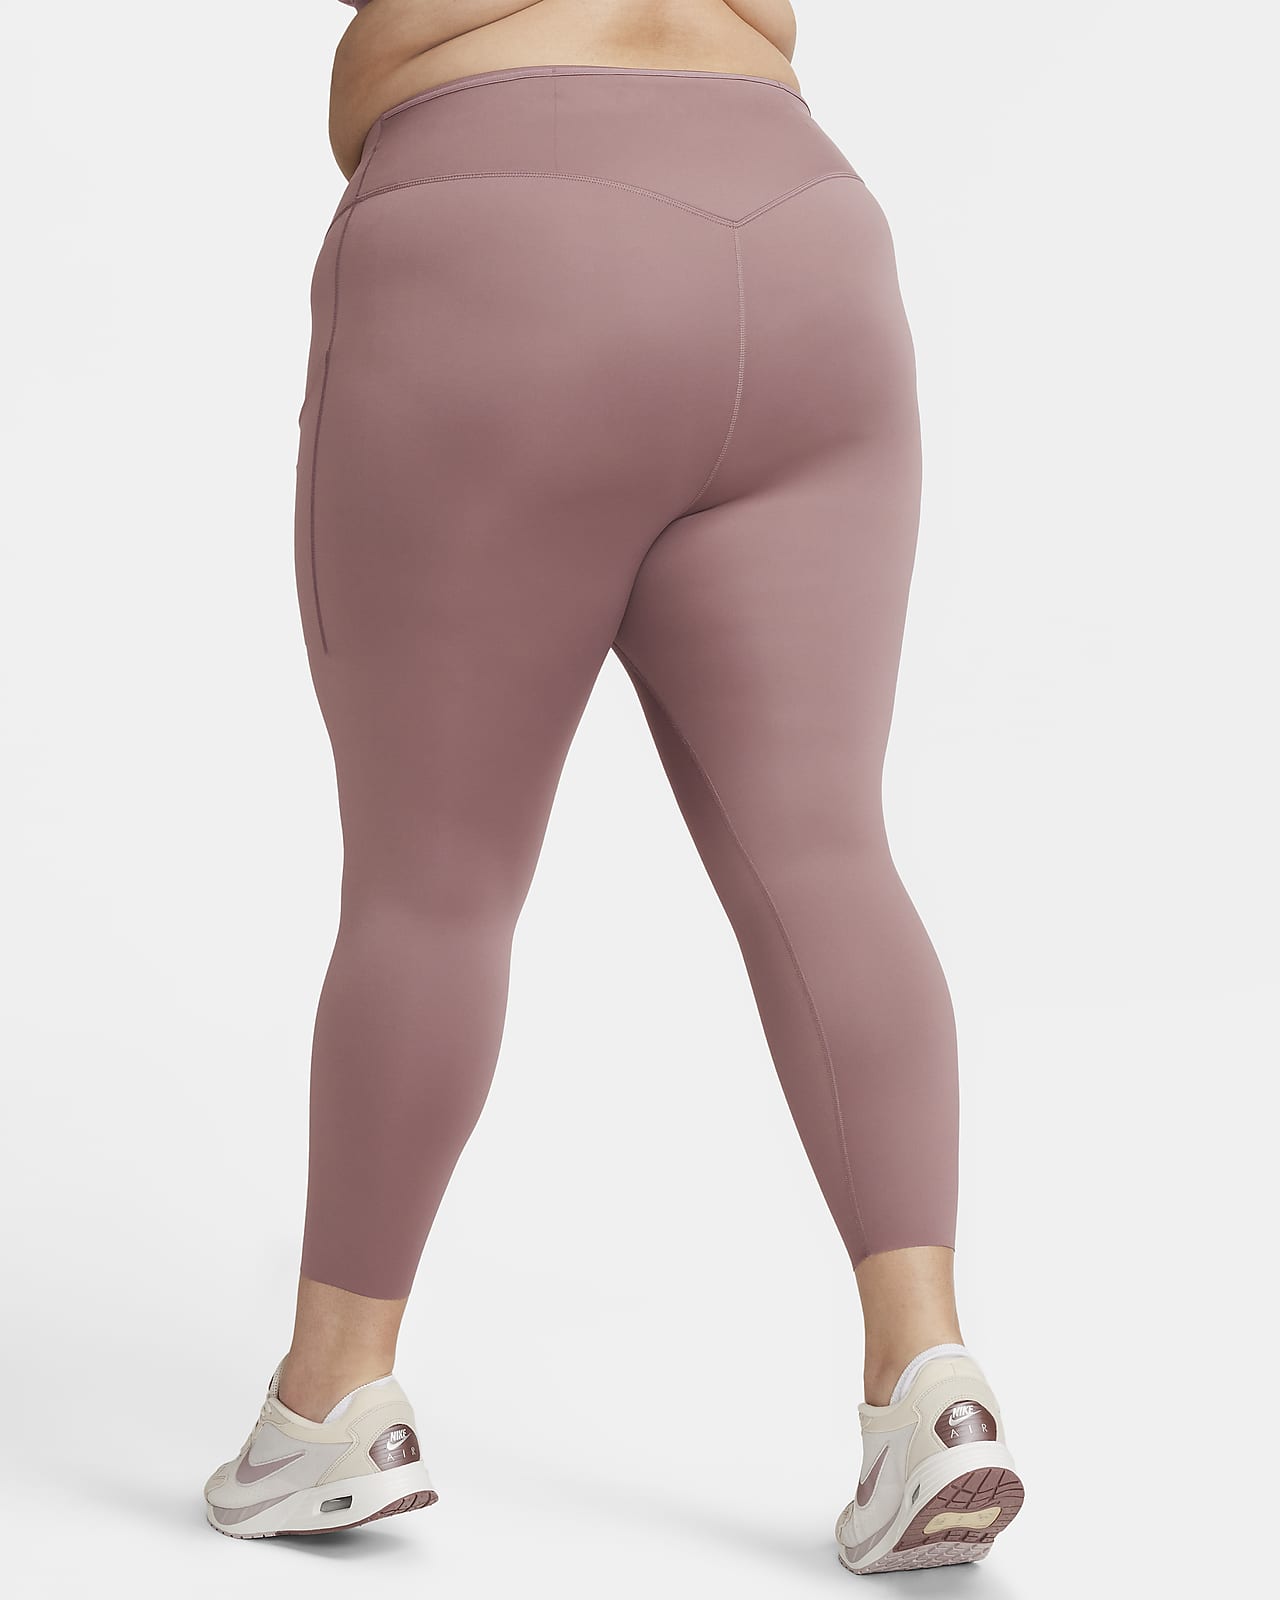 Nike One Women's High-Waisted 7/8 Leggings with Pockets (Plus Size